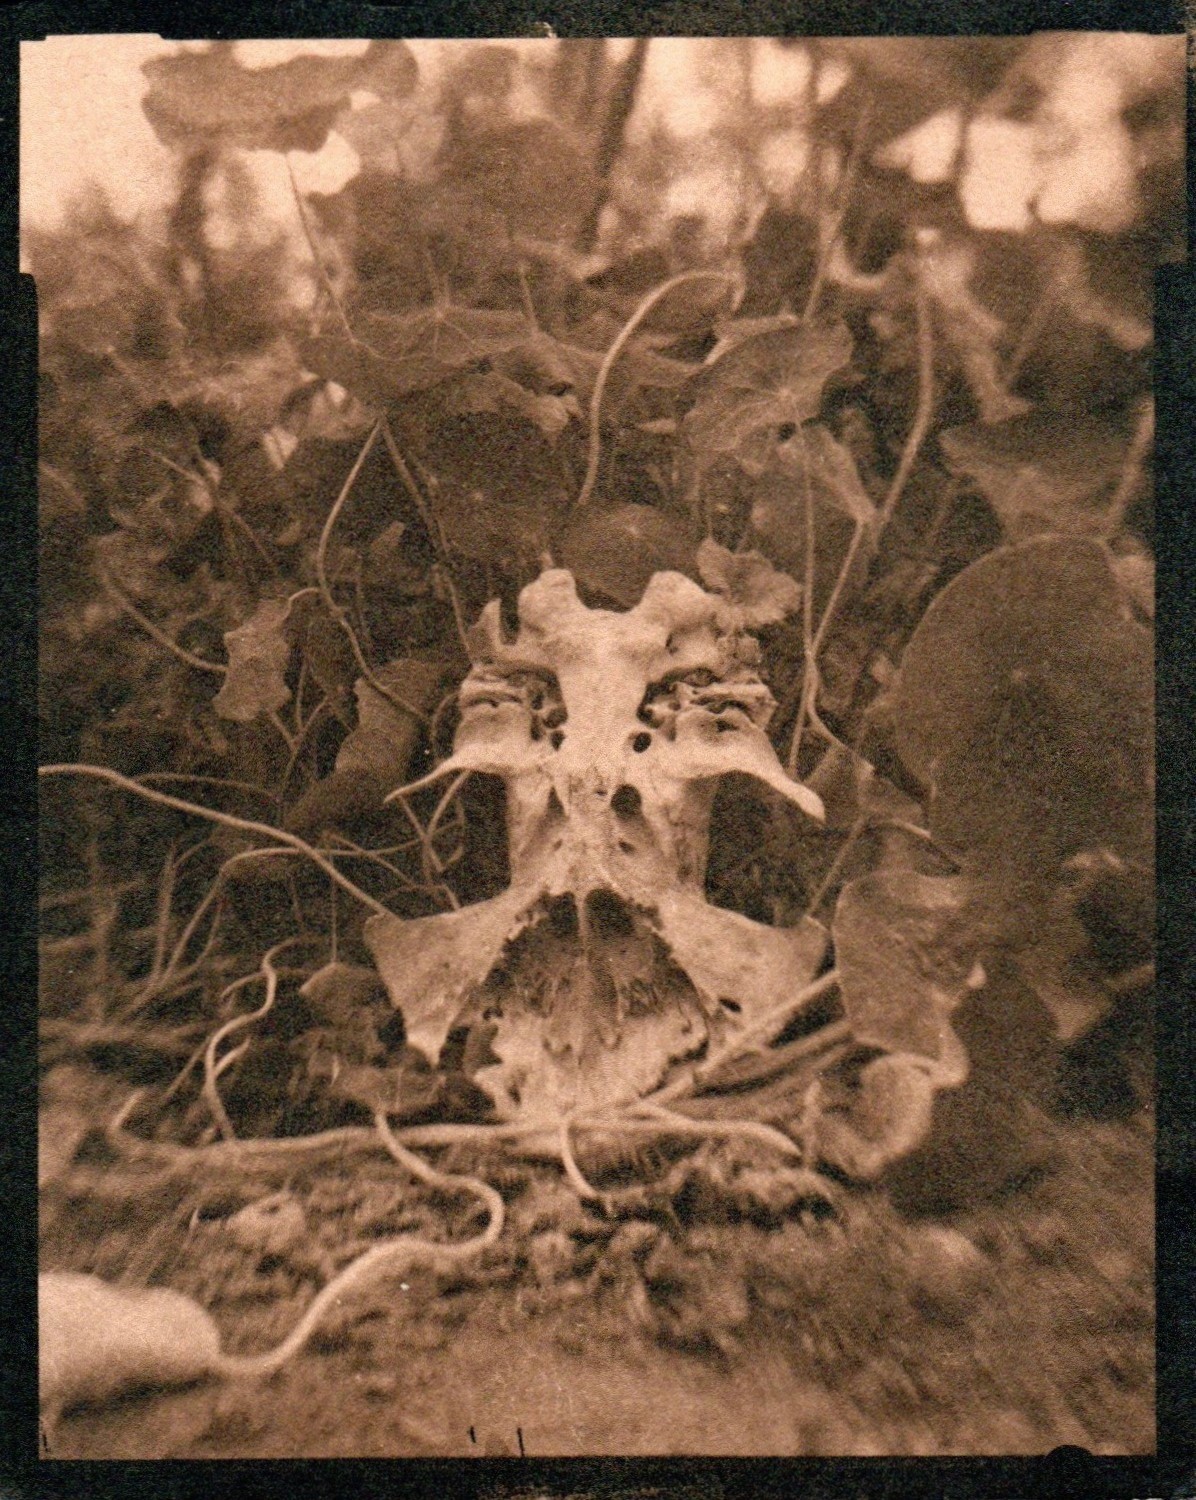 Skull | Tea toned cyanotype (from film negative shot in cardboard 4x5 camera with magnifying glass lens), 2022